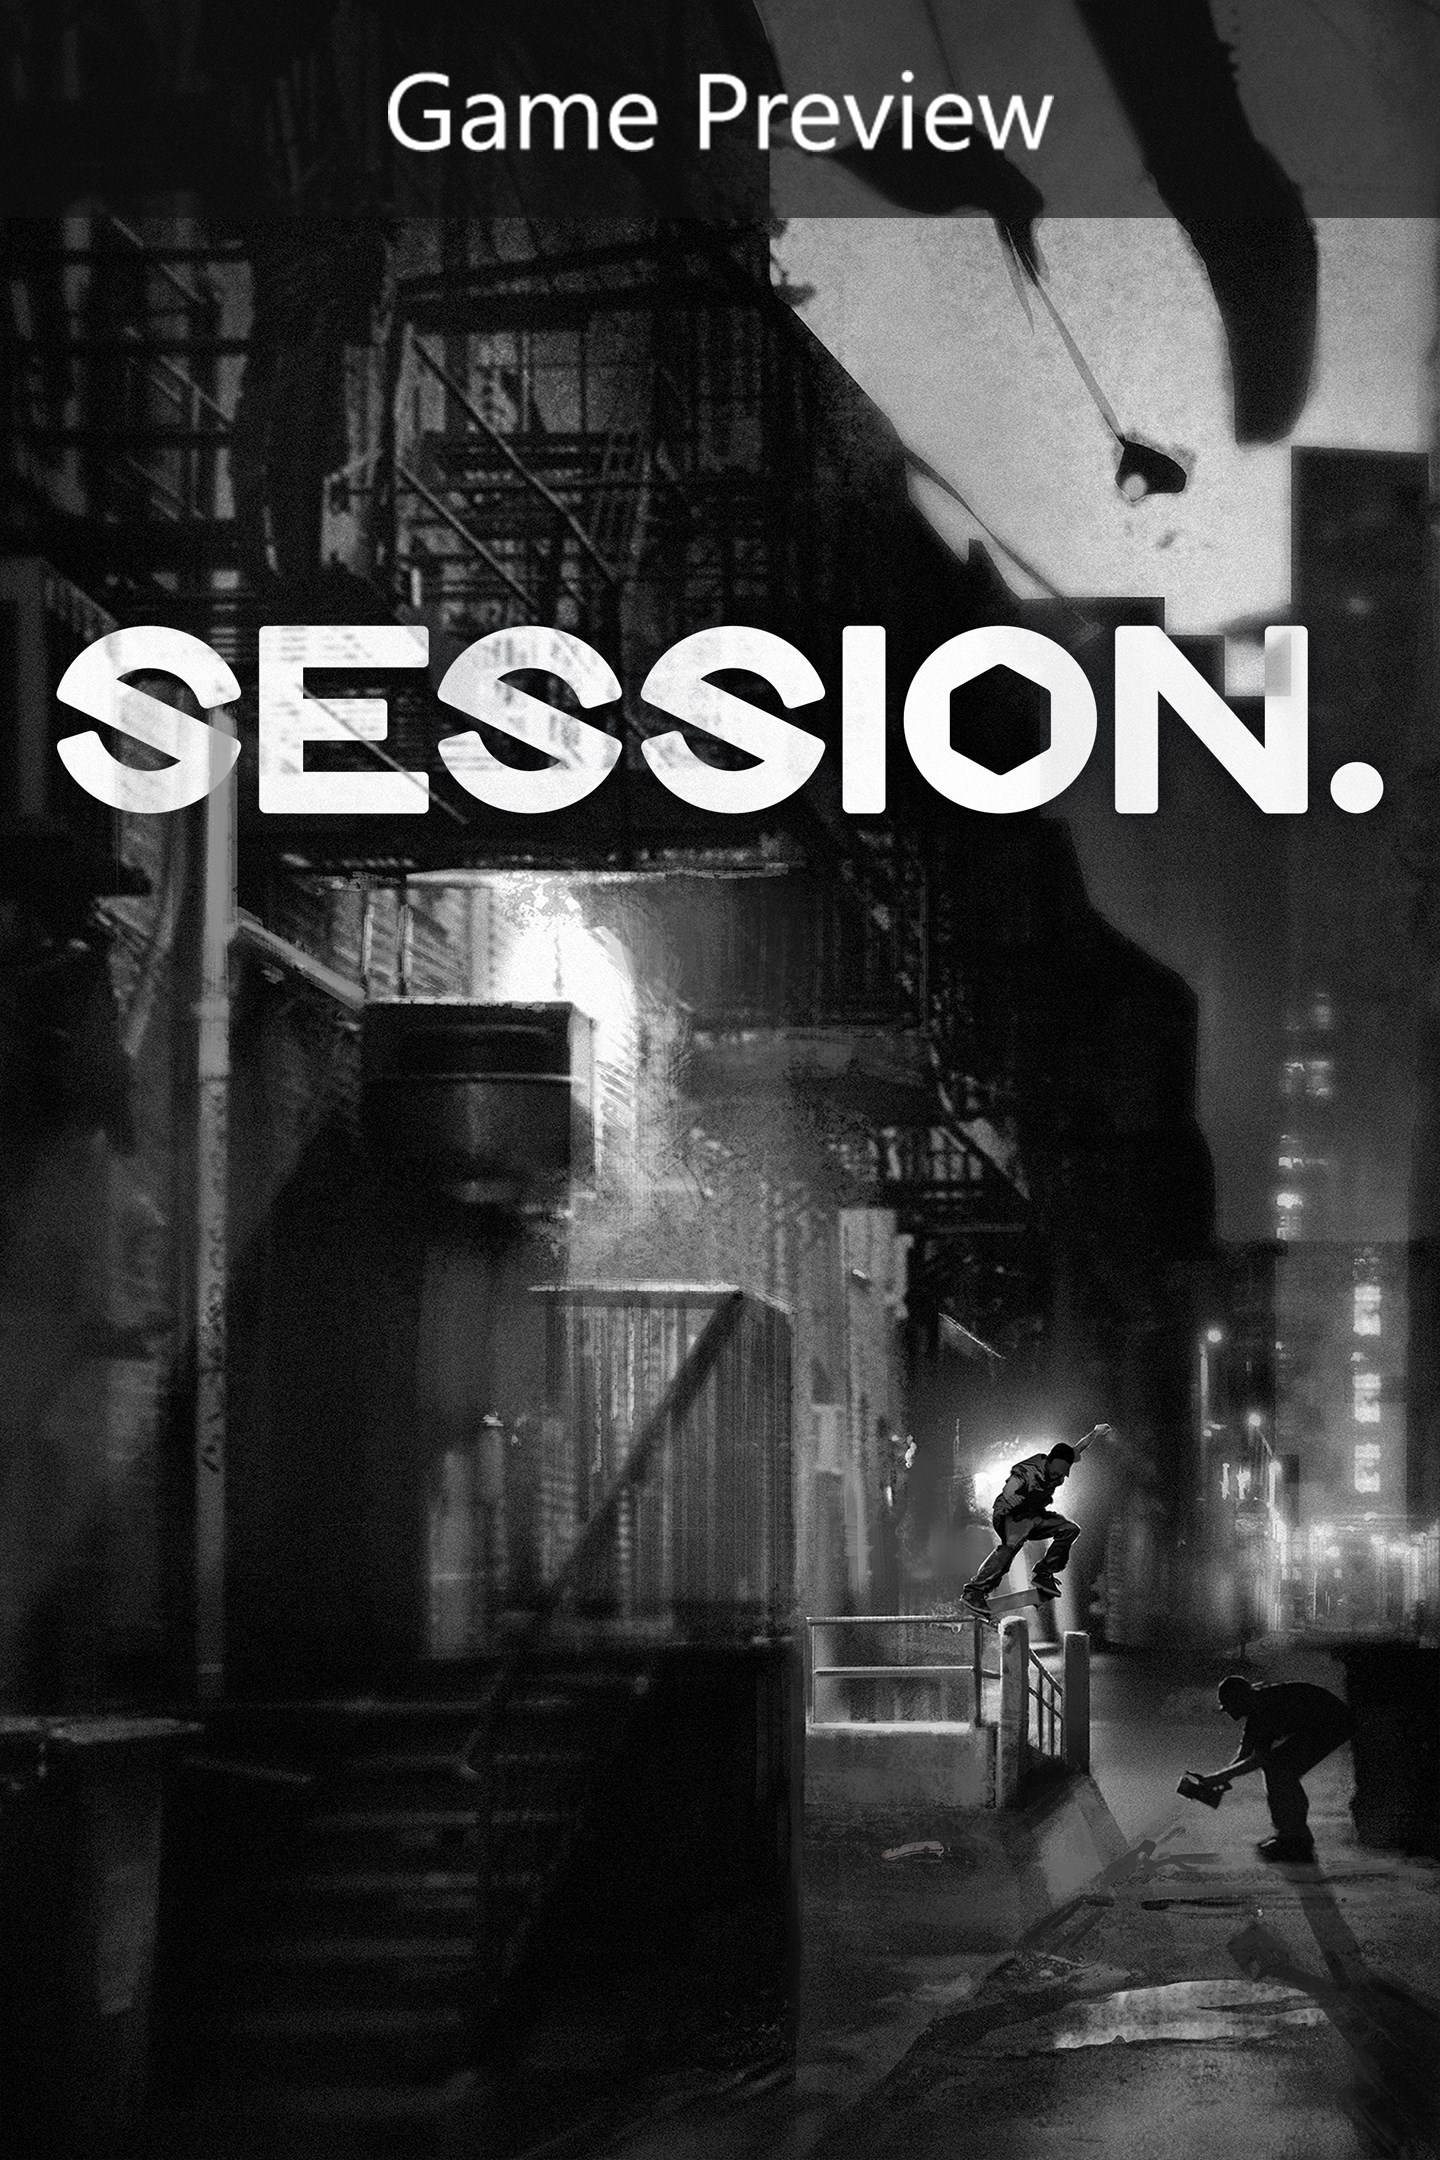 session skate game xbox one release date